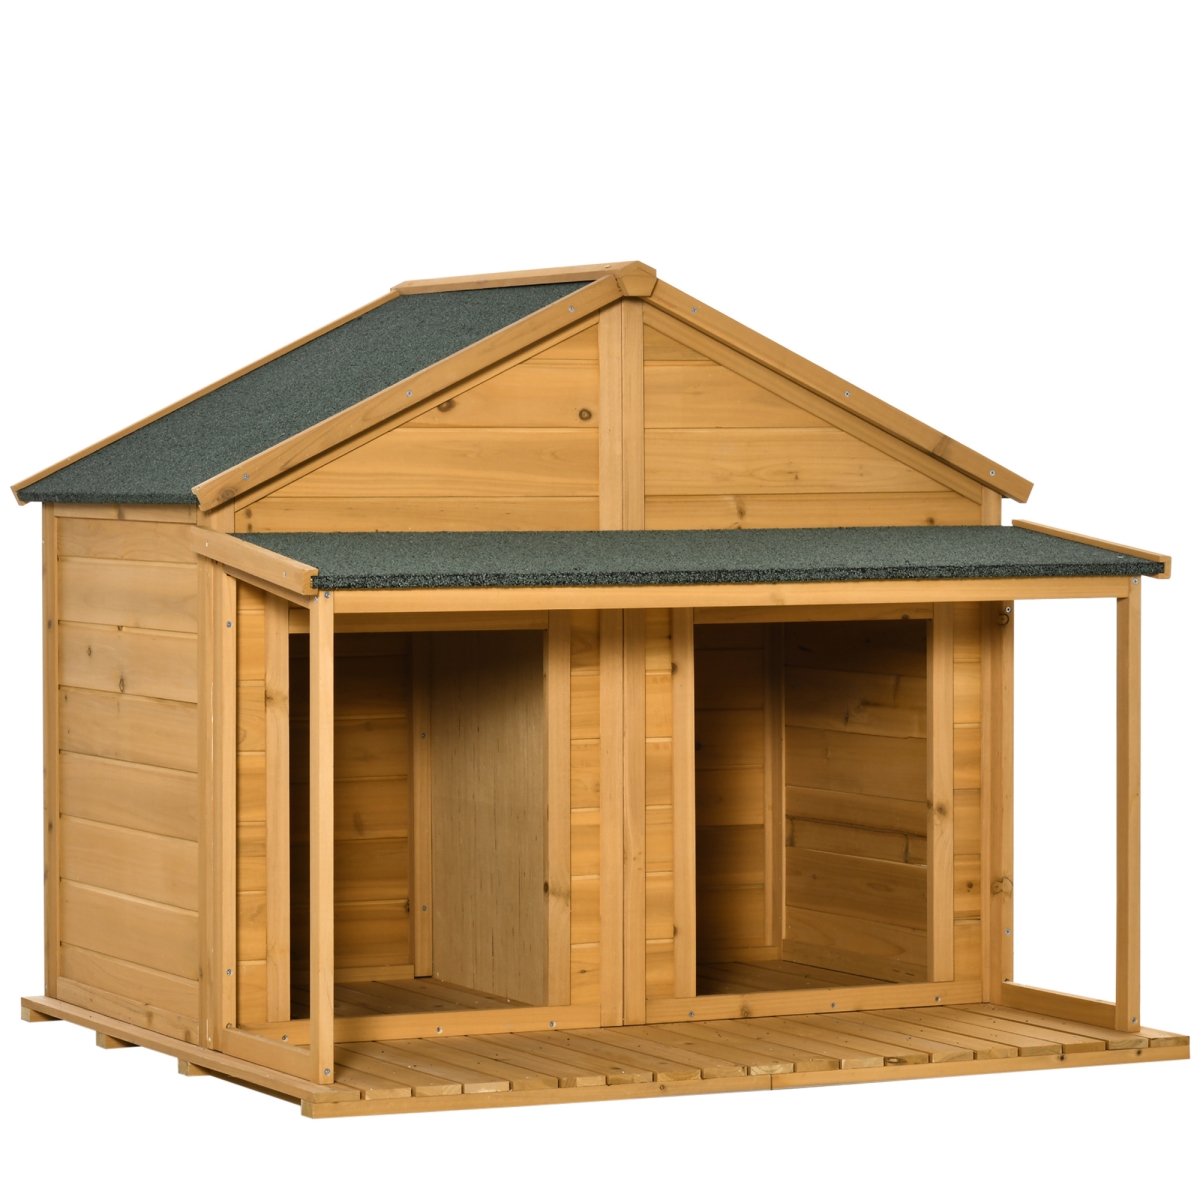 Picture of 212 Main D02-099 PawHut Wooden Dog House Outdoor for 2 Medium Small Dogs with Porch